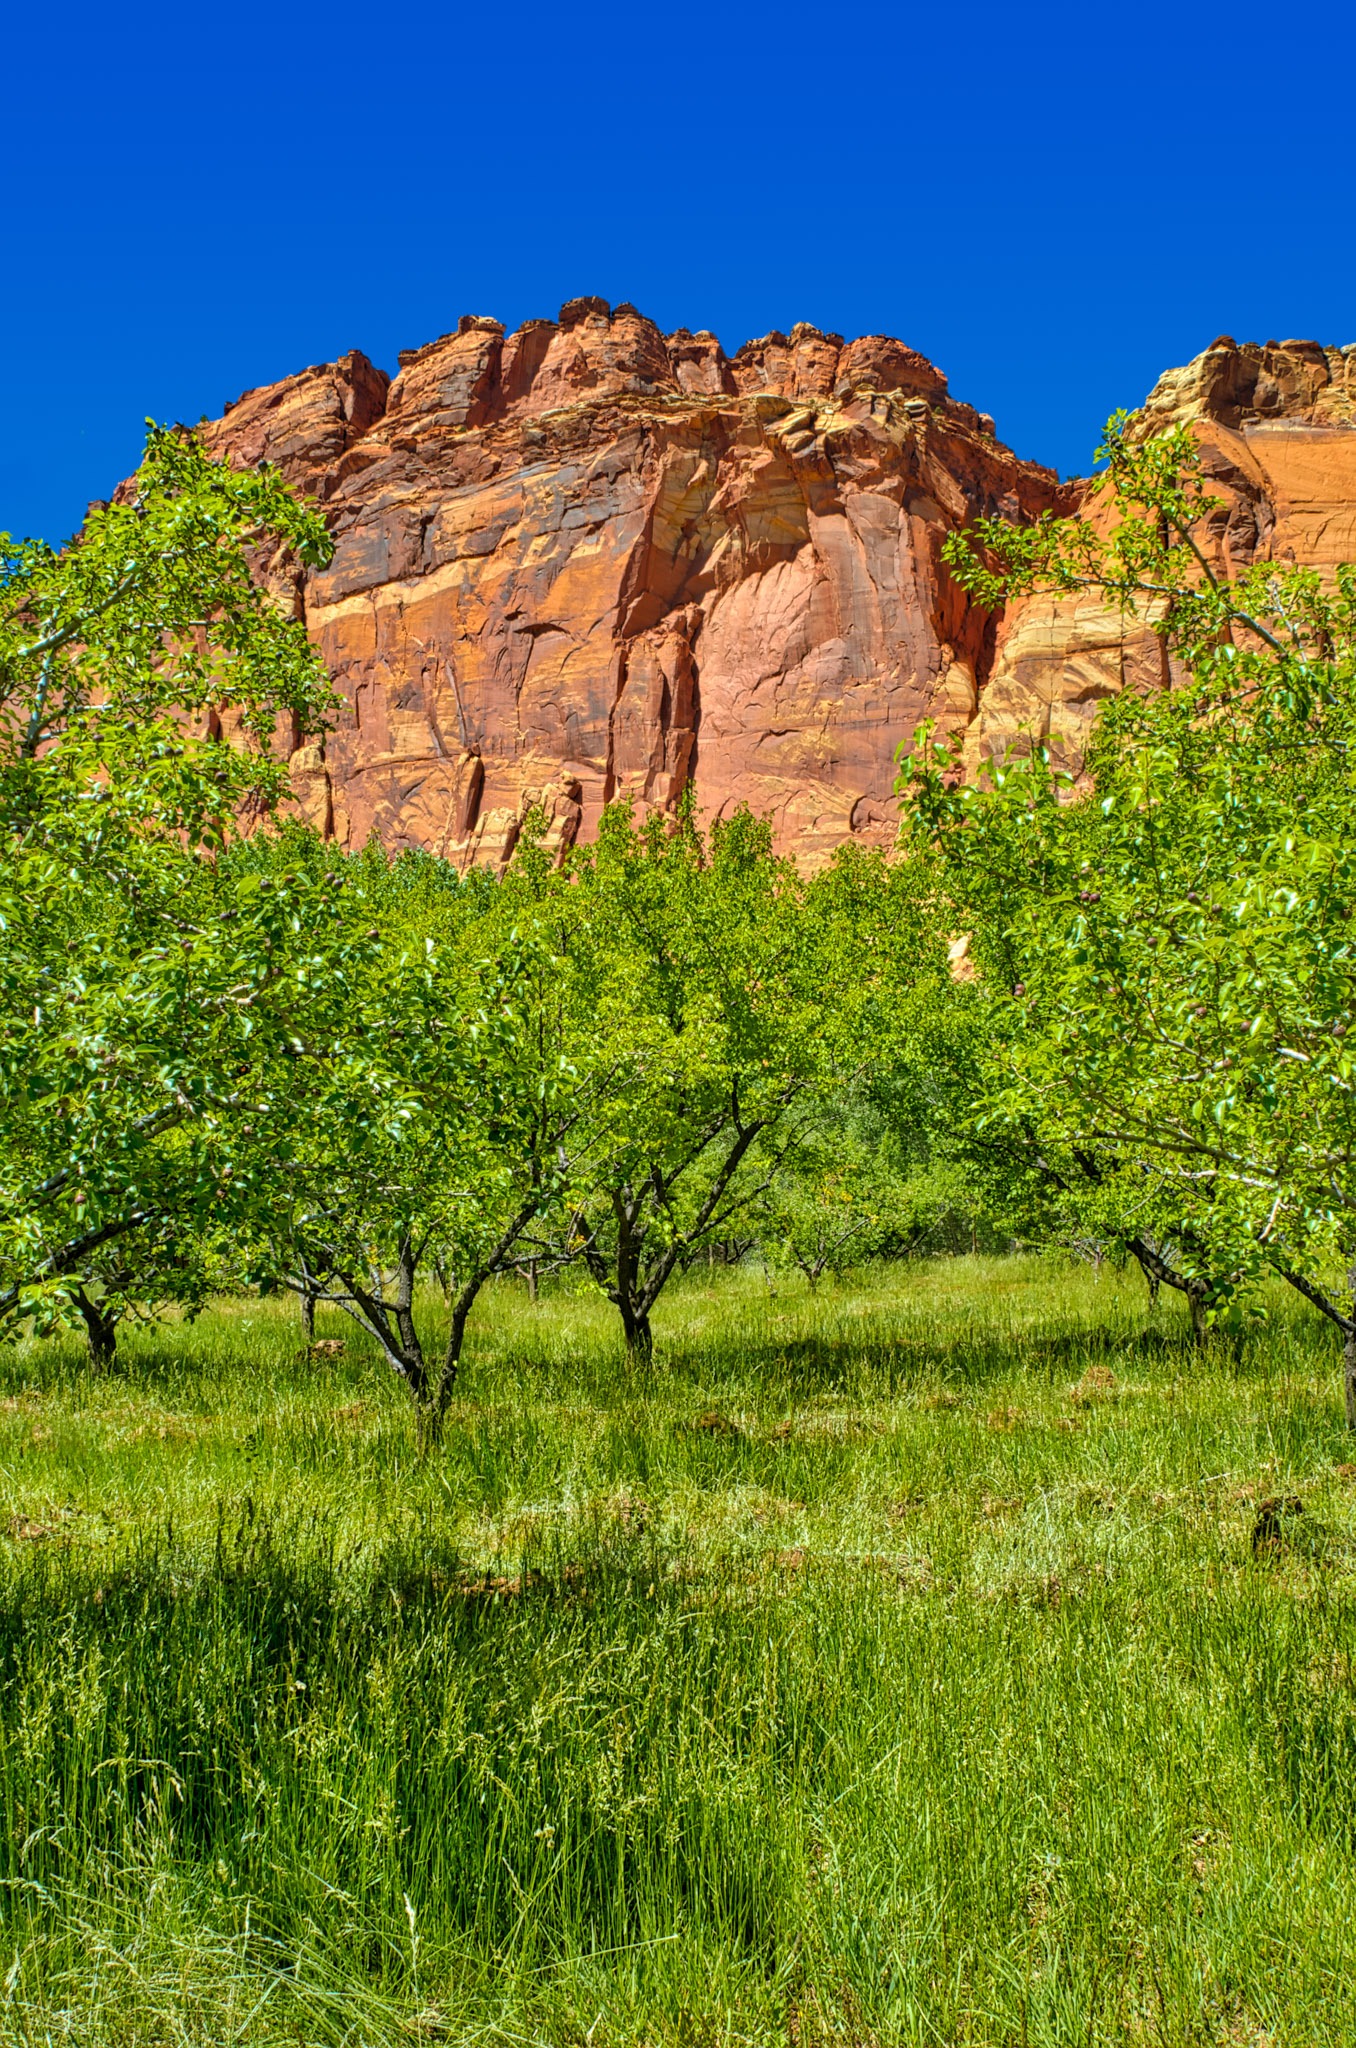 This is a view of the orchard along Camp Ground Road in the Fruita District of Capitol Reef National Park in Utah.